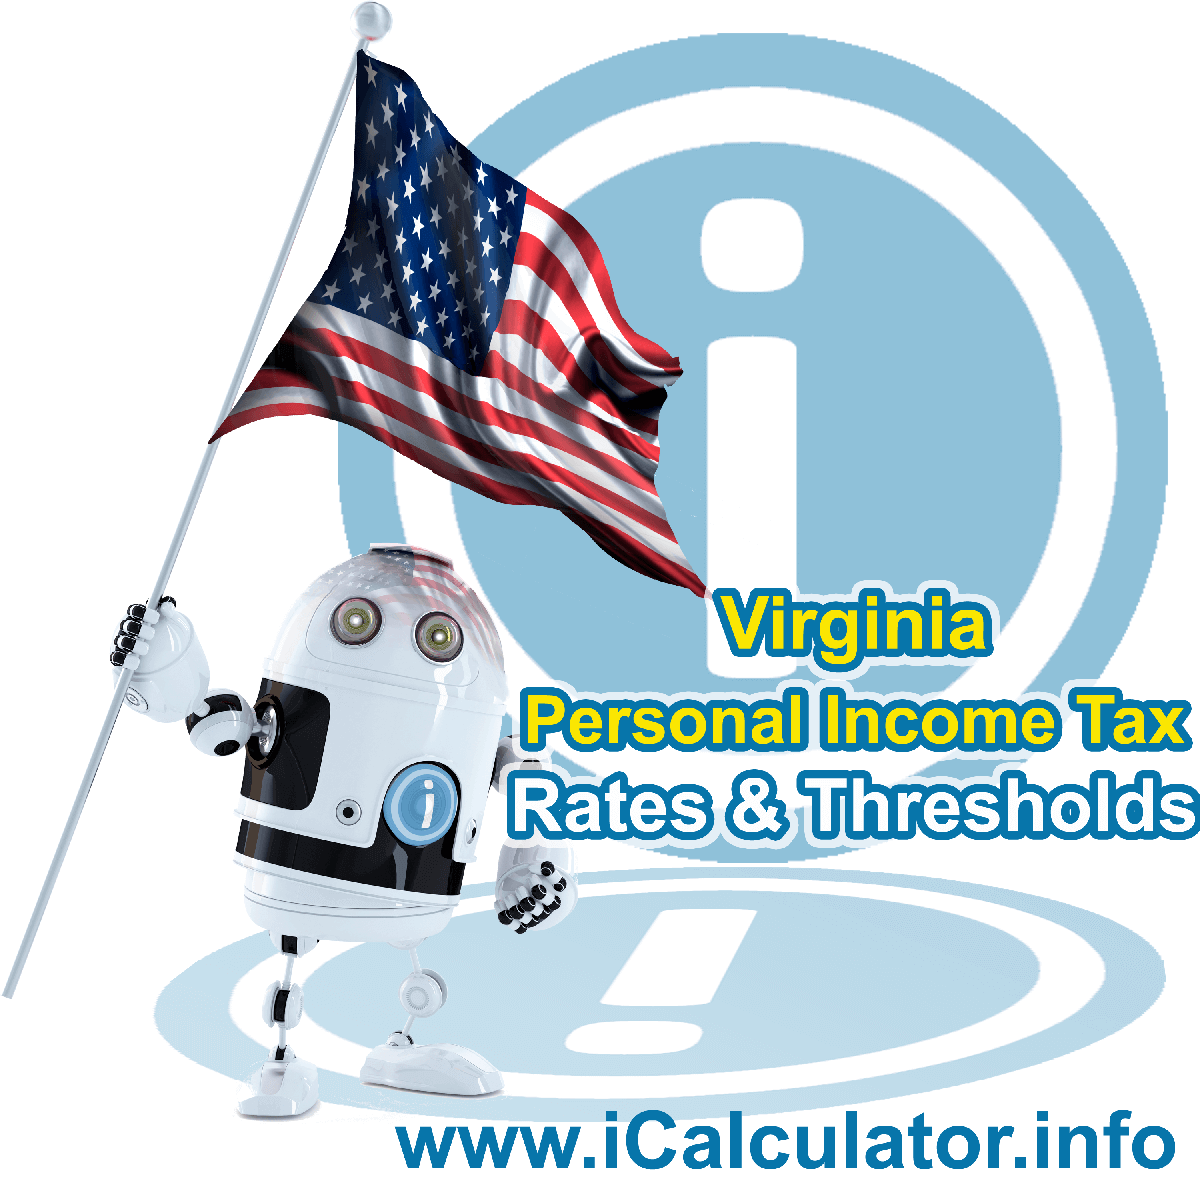 Virginia State Tax Tables 2023. This image displays details of the Virginia State Tax Tables for the 2023 tax return year which is provided in support of the 2023 US Tax Calculator